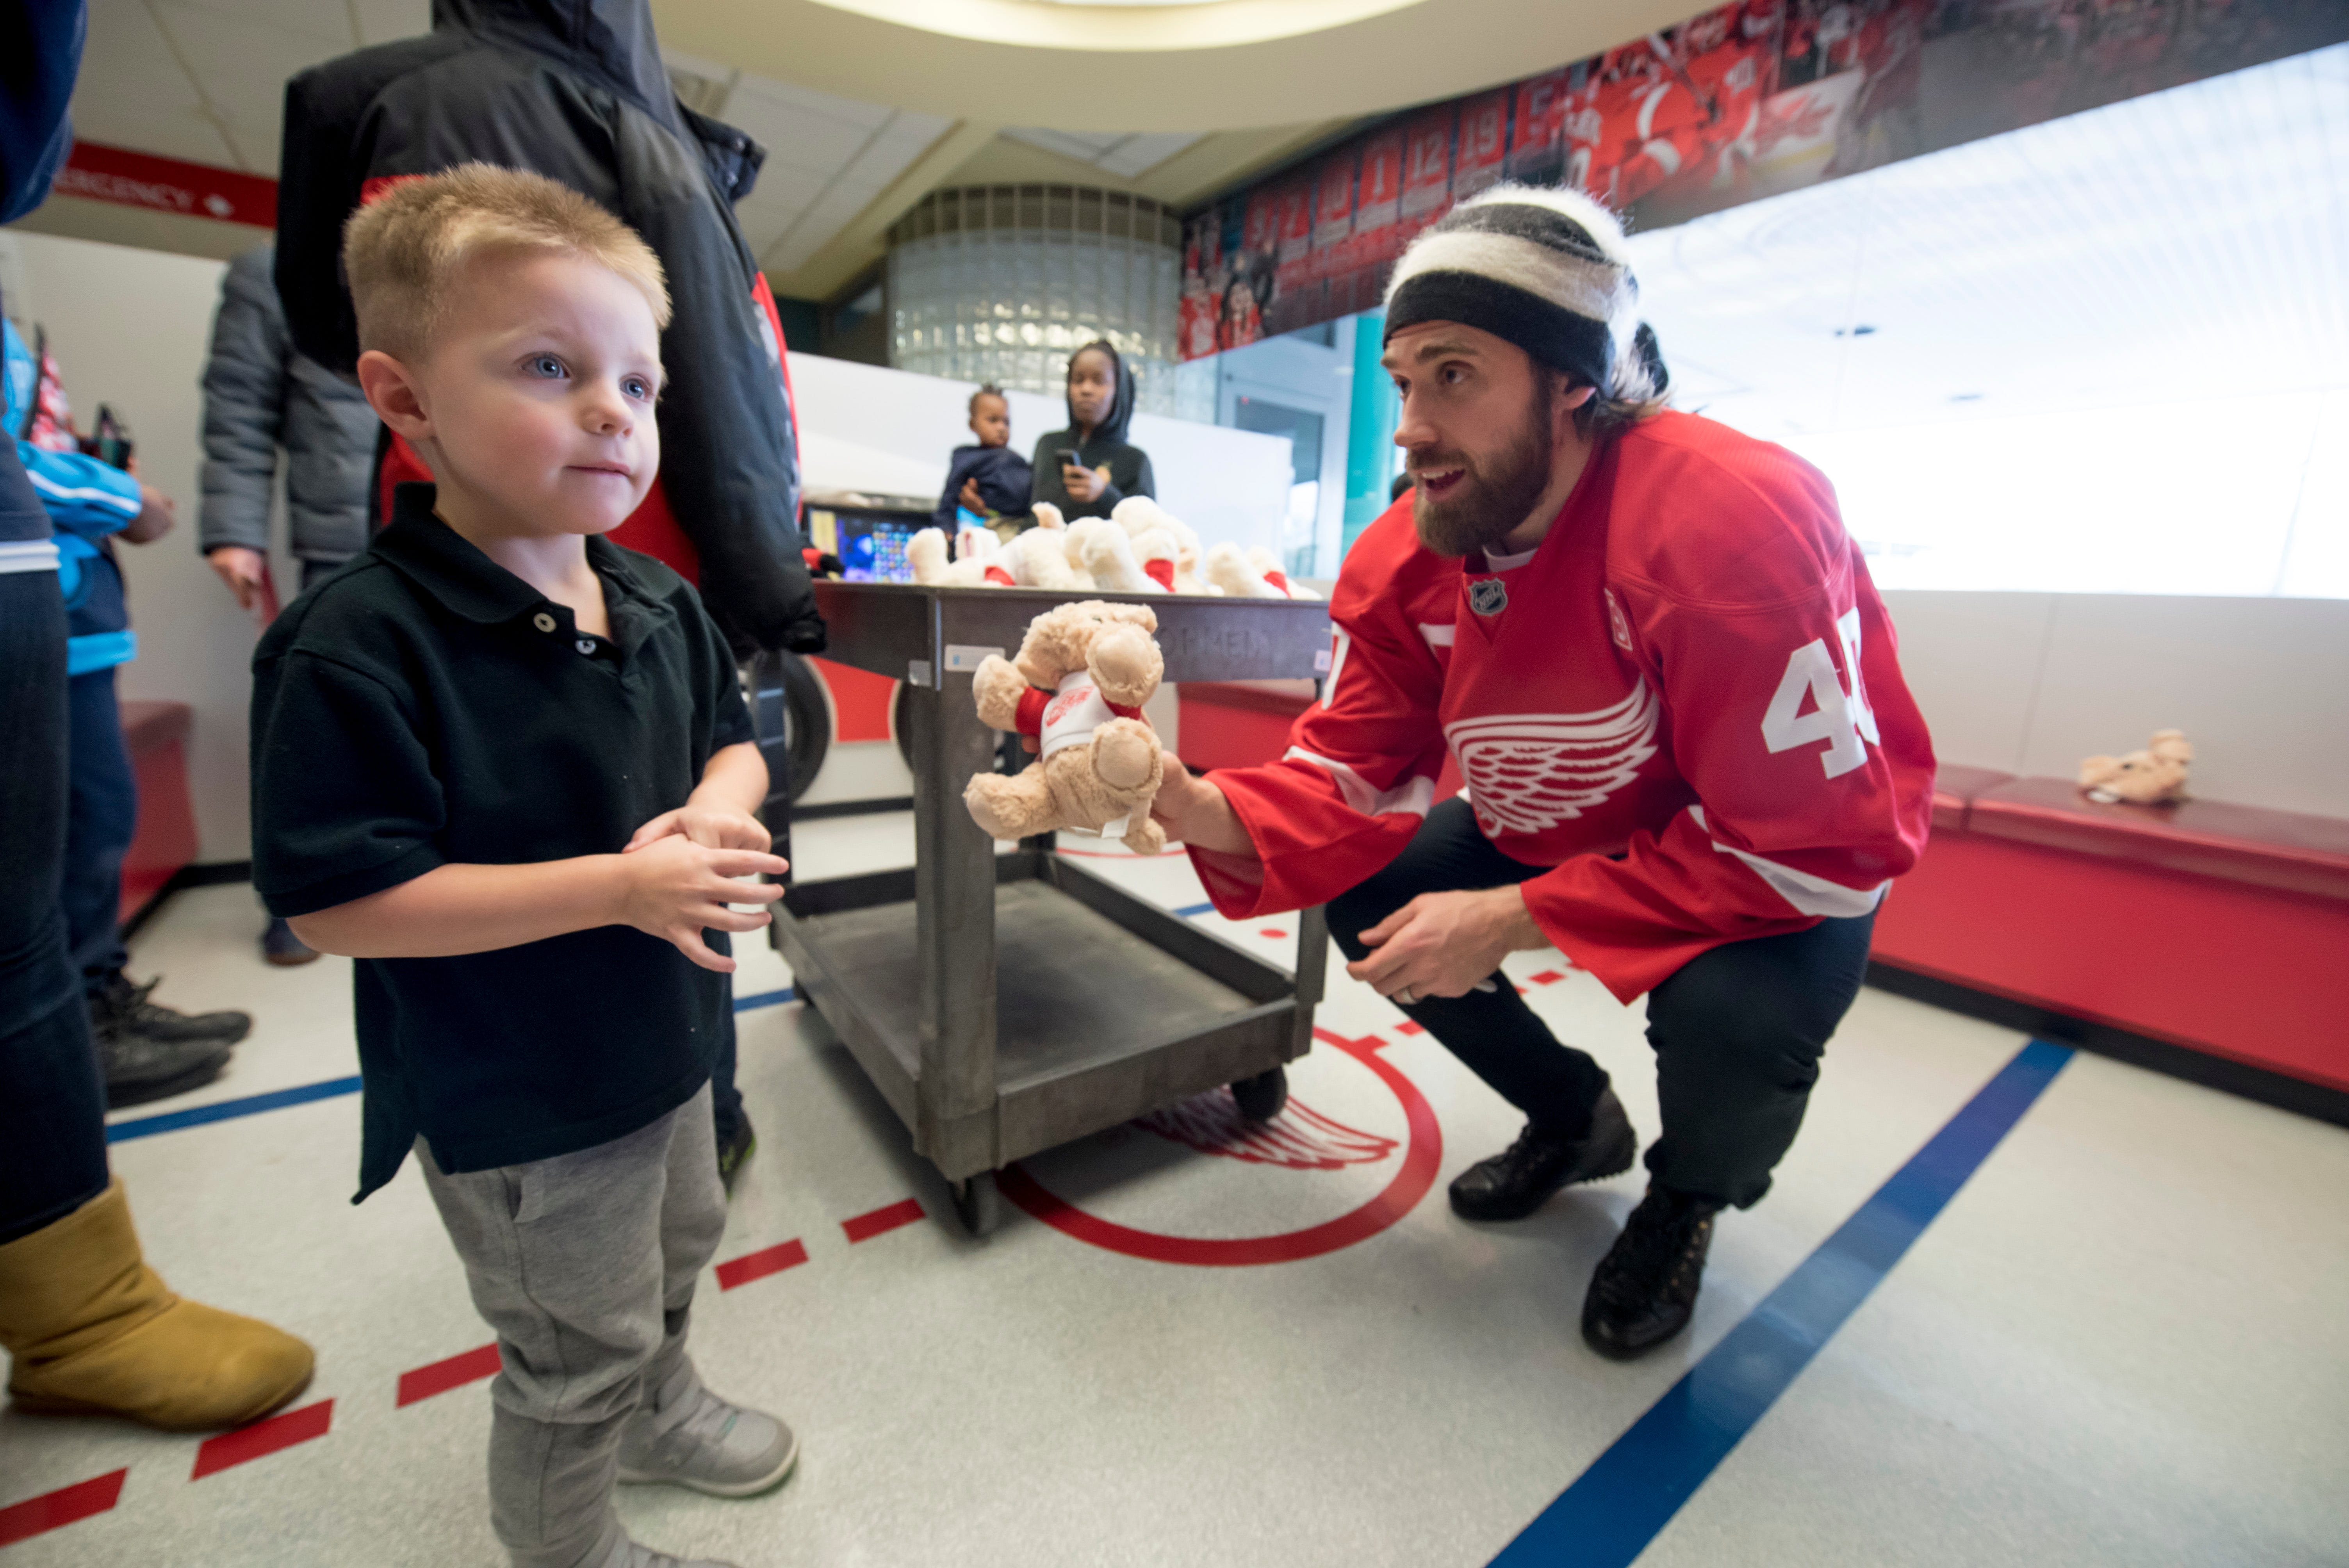 Jaxon Drake, of Chesterfield, finds himself a little shy as Red Wings captain Henrik Zetterberg tries to give him a stuffed bear while visiting patients at Children ' s Hospital of Michigan.